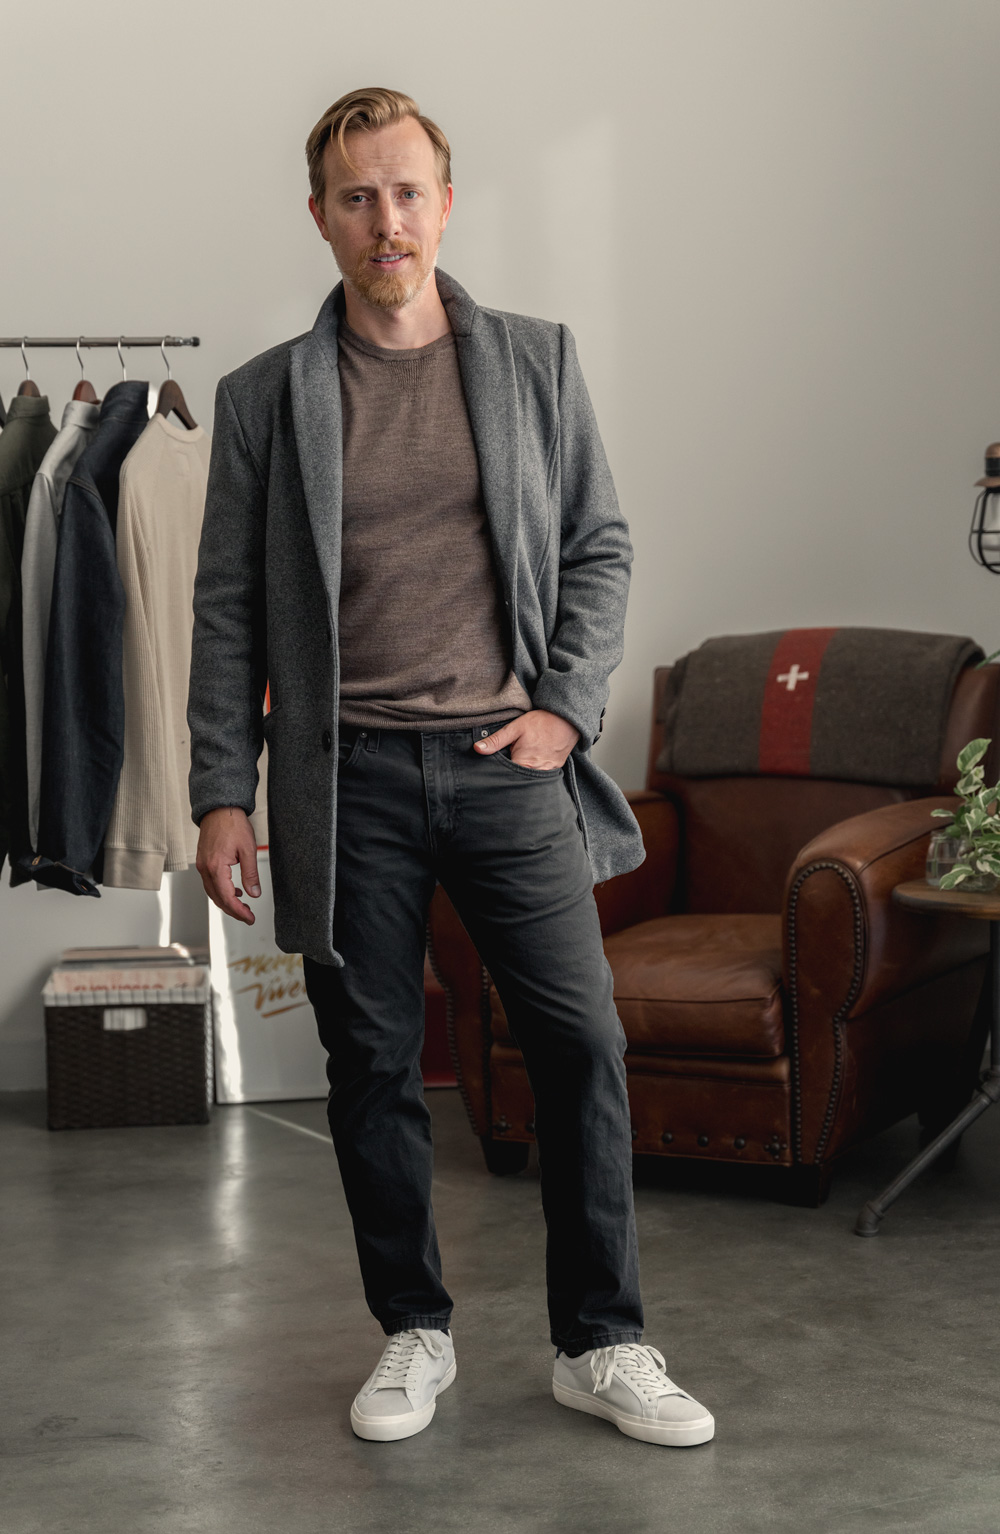 Simple menswear with a gray top coat, brown blazer, dark gray jeans and white sneakers